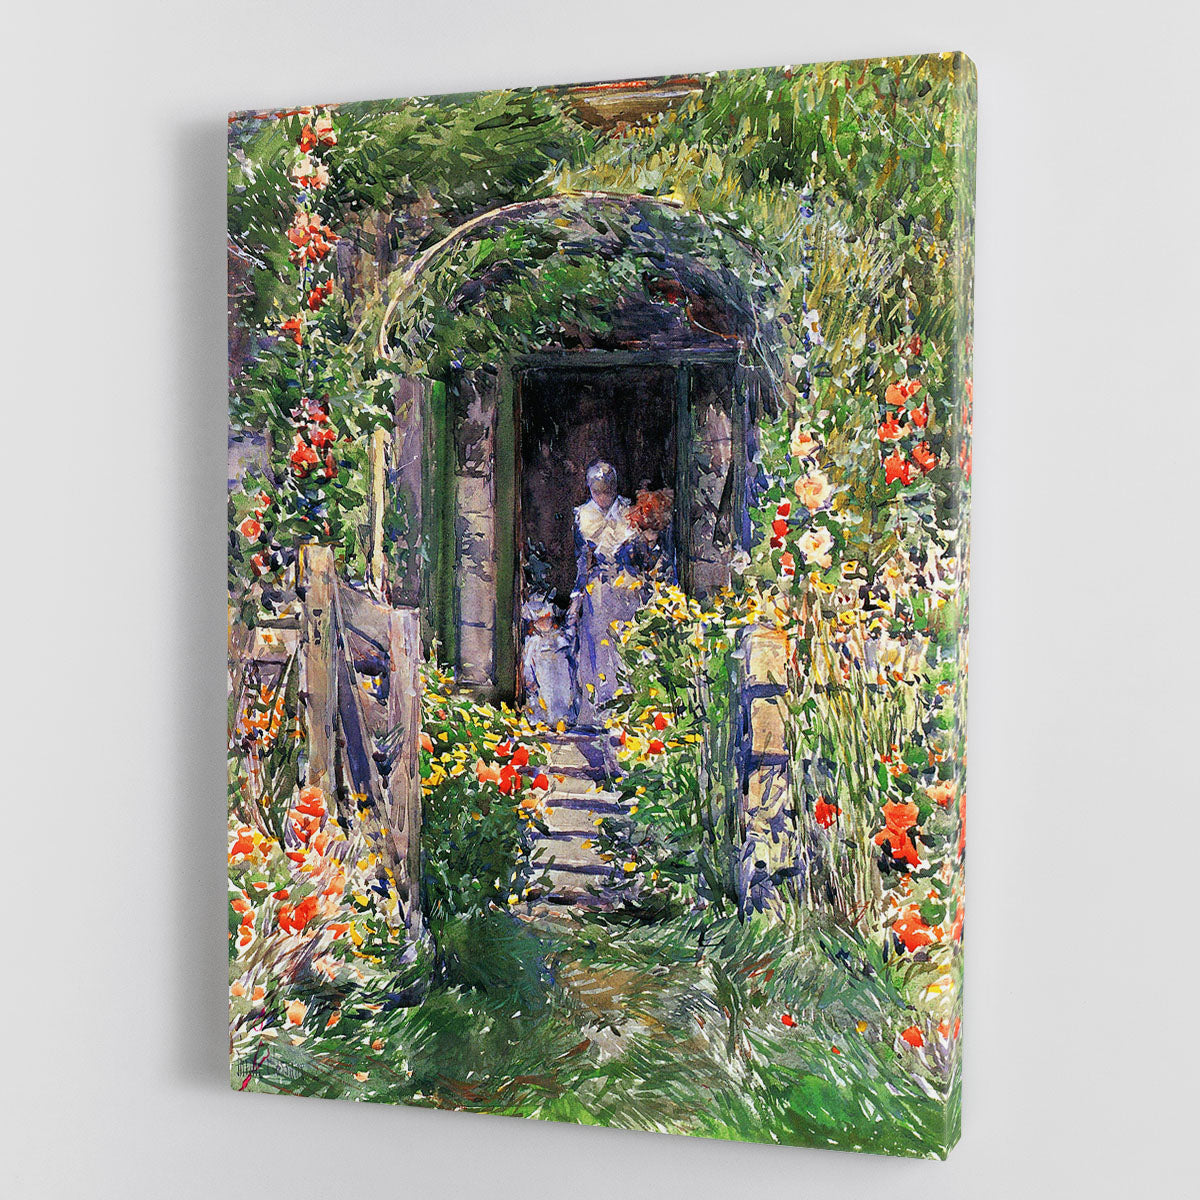 Isles of Shoals Garden by Hassam Canvas Print or Poster - Canvas Art Rocks - 1